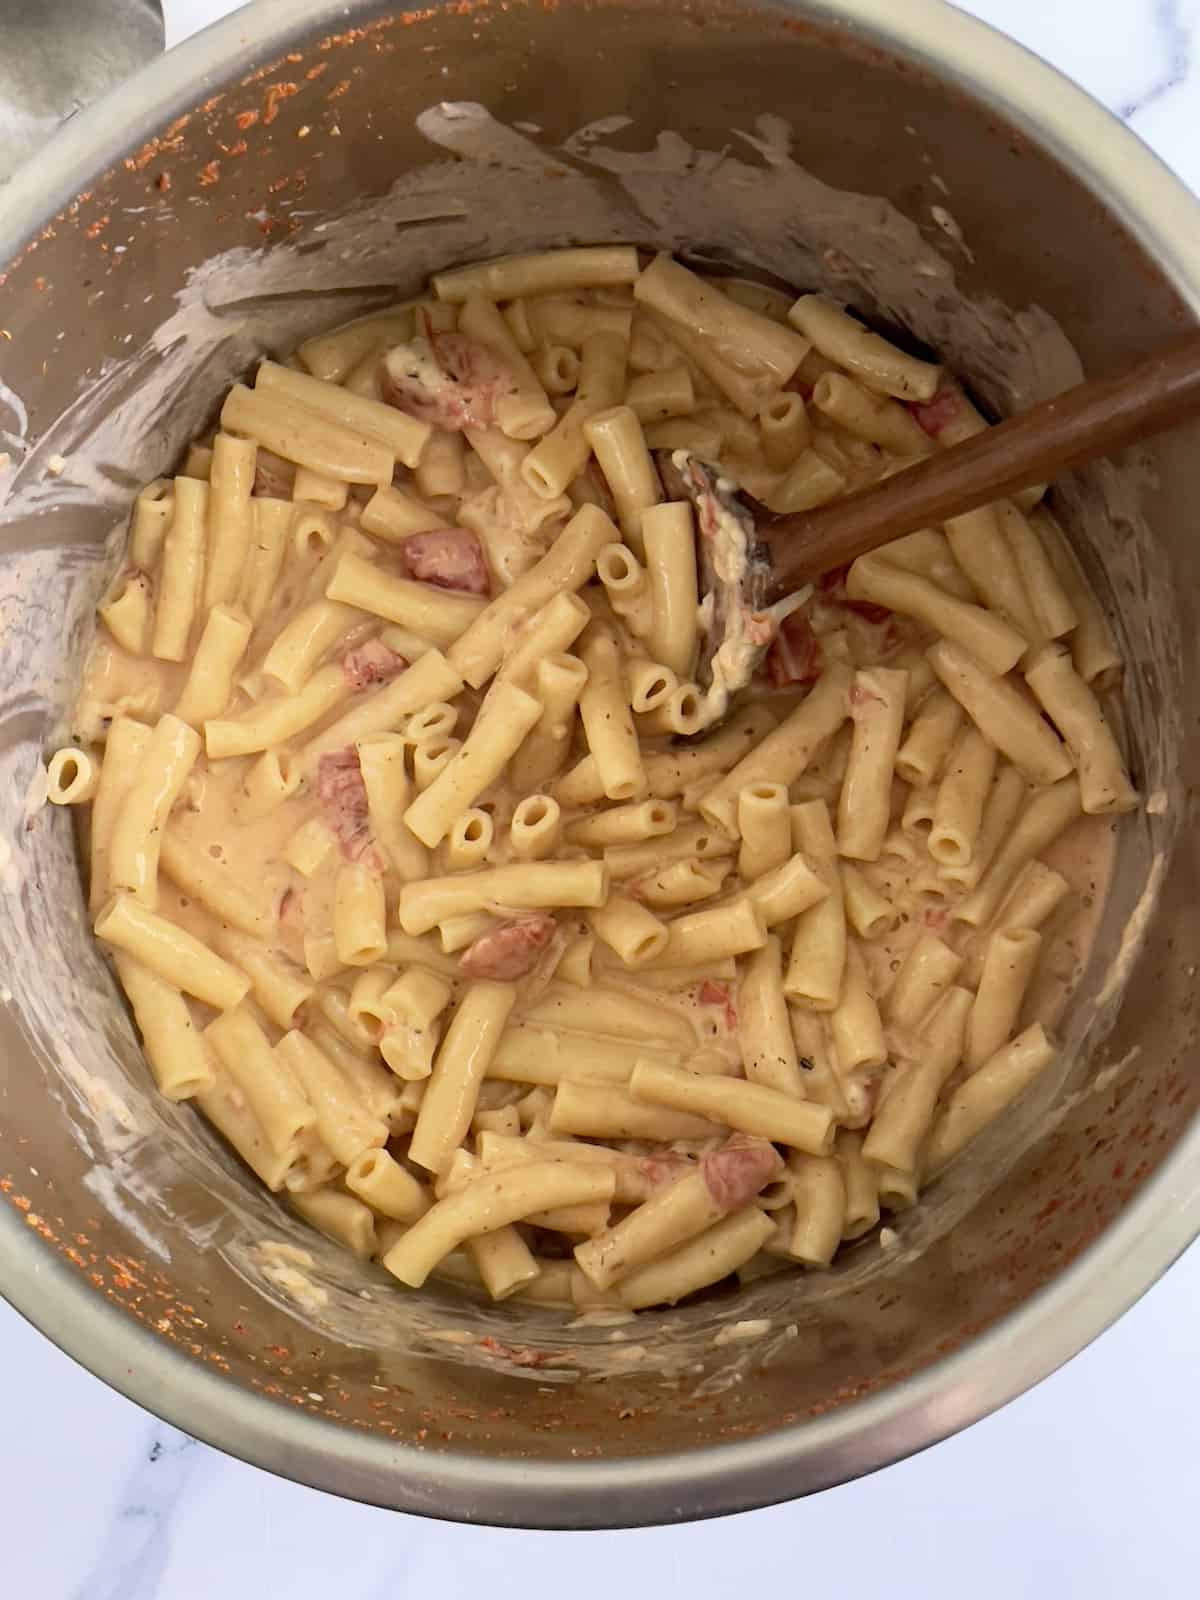 cooked pasta combined with a cheesy sauce in the inner pot